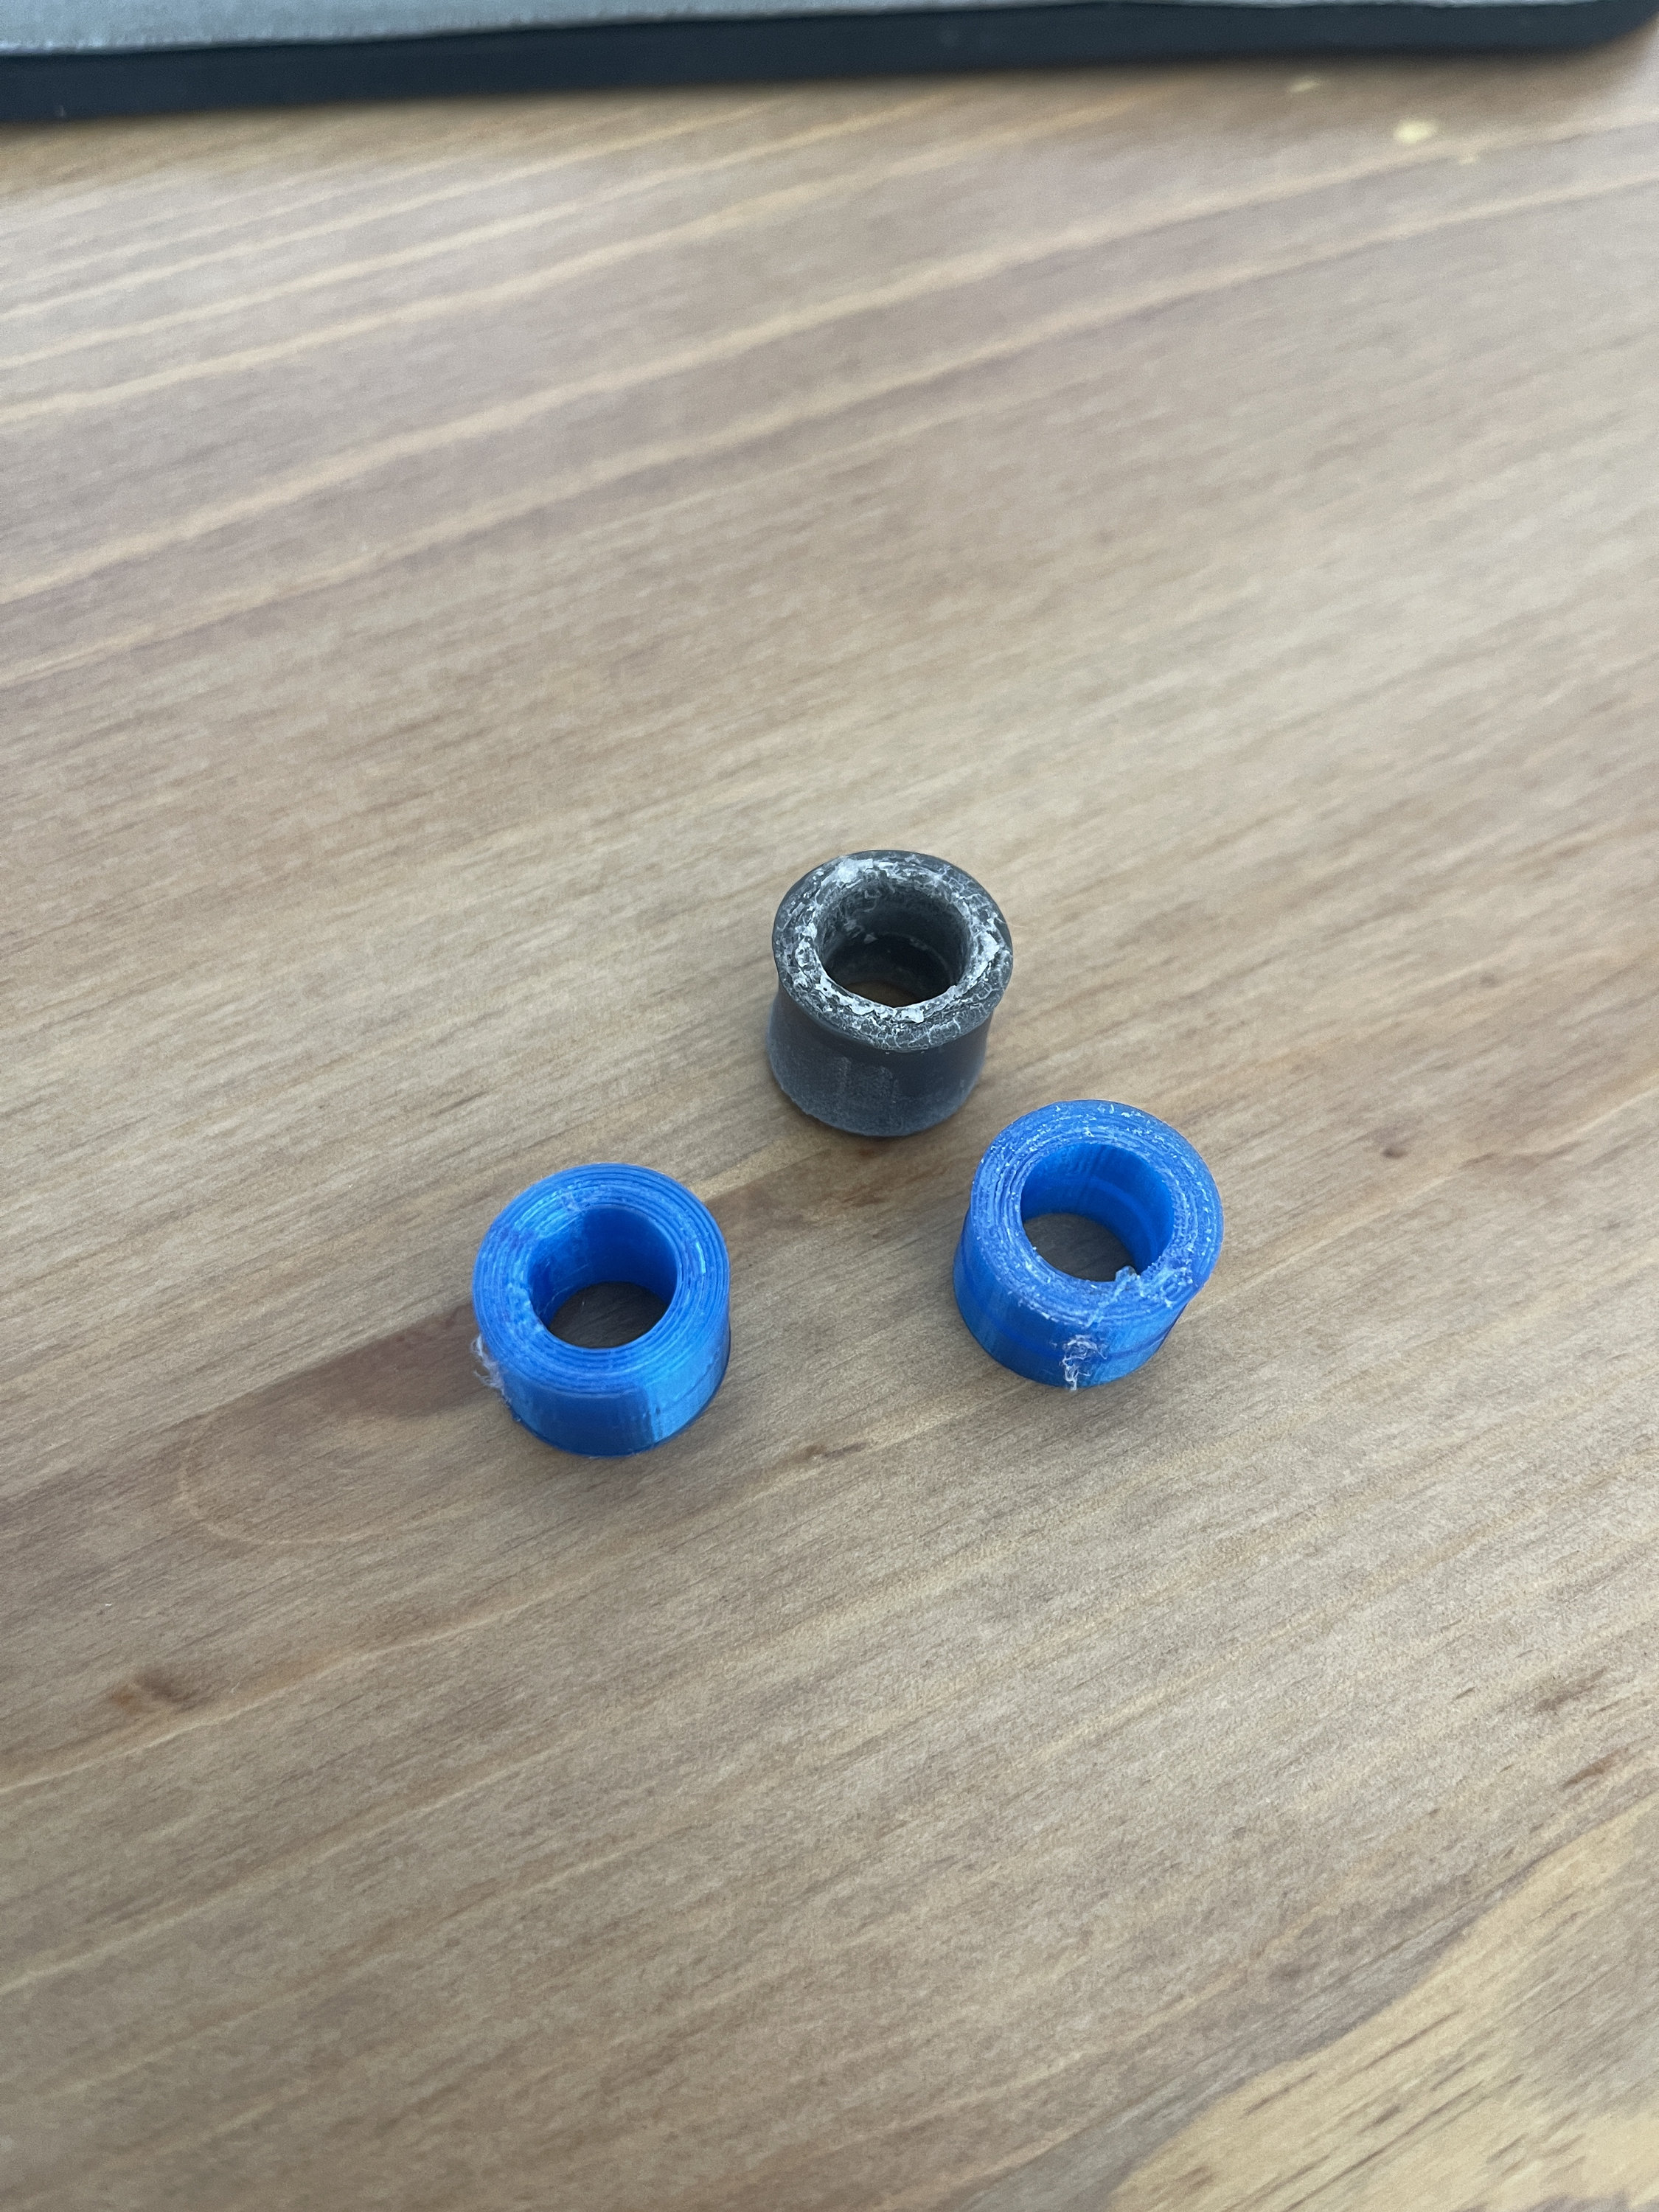 Cricut Maker Roller Rubber Wheel Replacement by YoshiK11 - Thingiverse